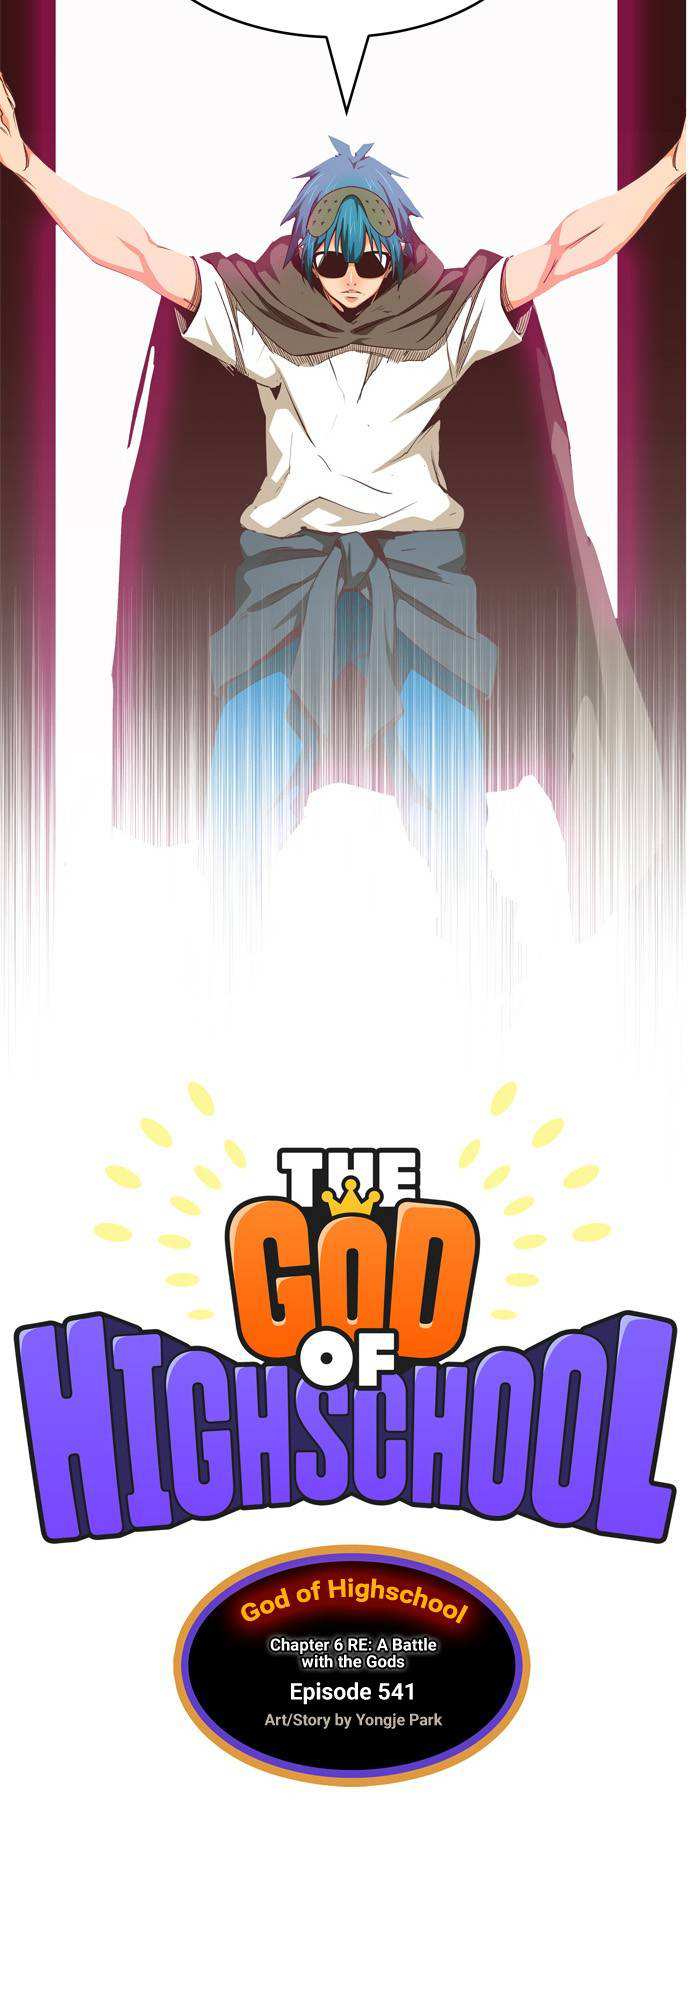 The God of High School, read The God of High School, The God of High School manga, GOHS, the god of high school season 2, the god of high school chapter 541